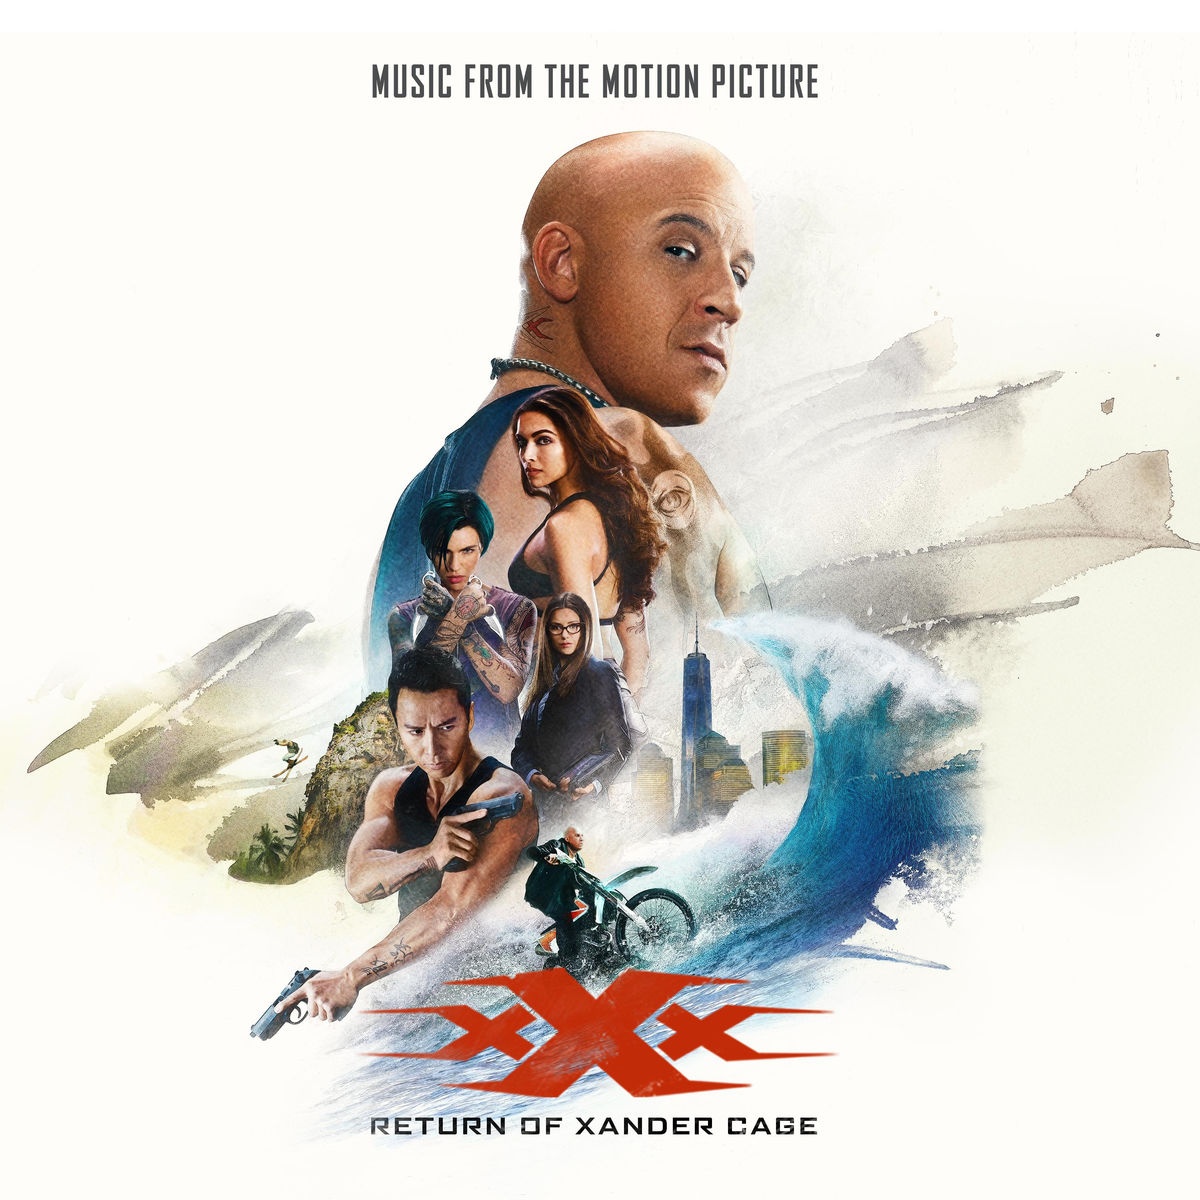 xXx: Return of Xander Cage (Music from the Motion Picture)